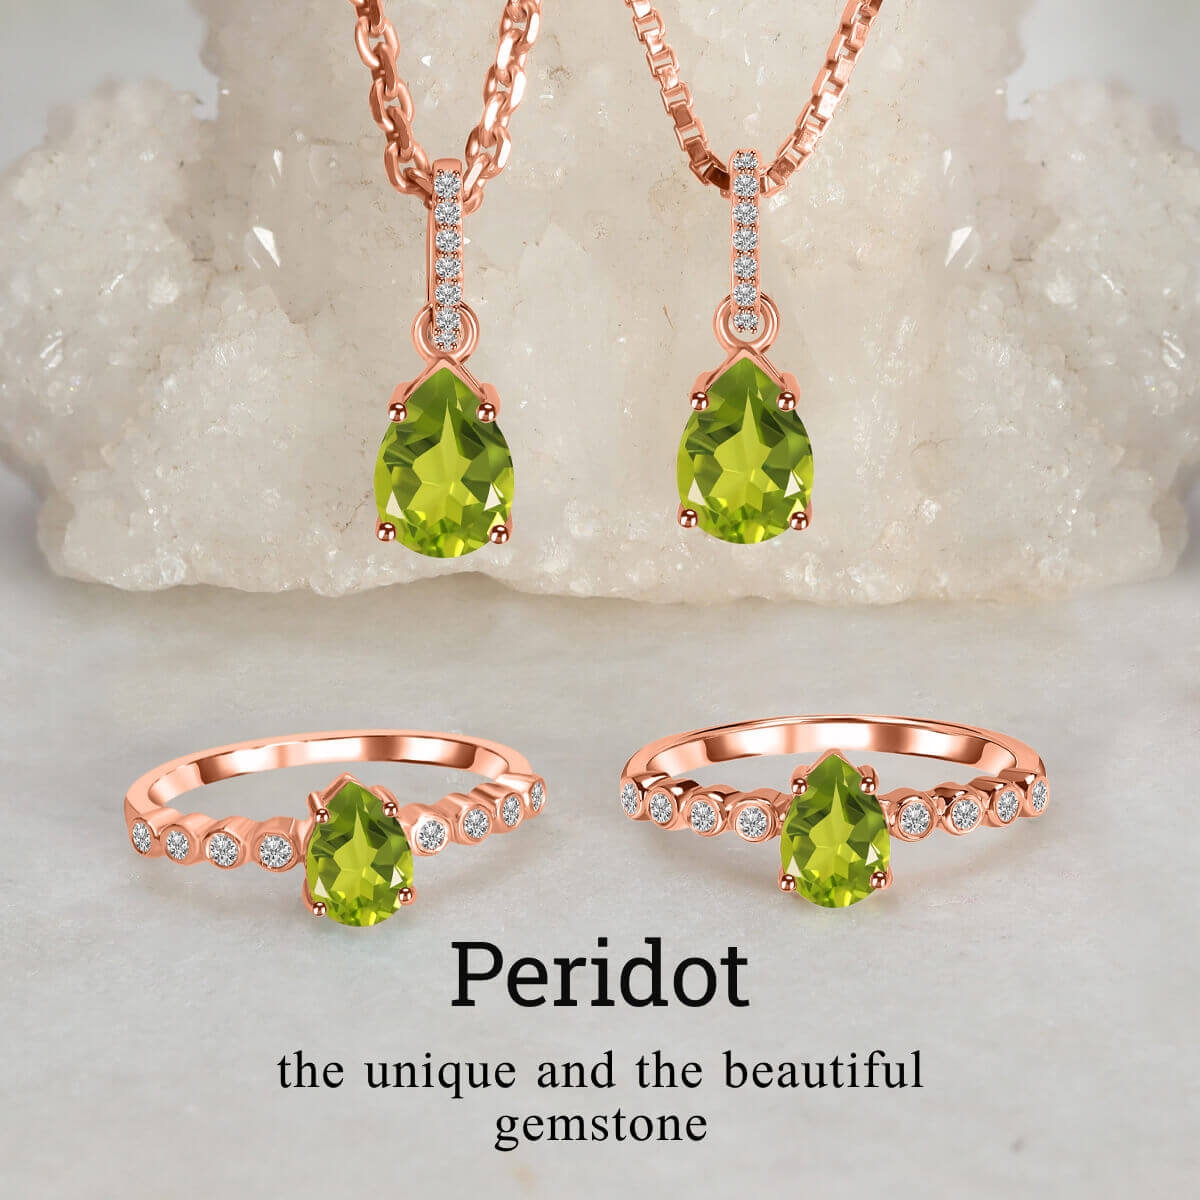 Peridot- the unique and the beautiful gemstone 